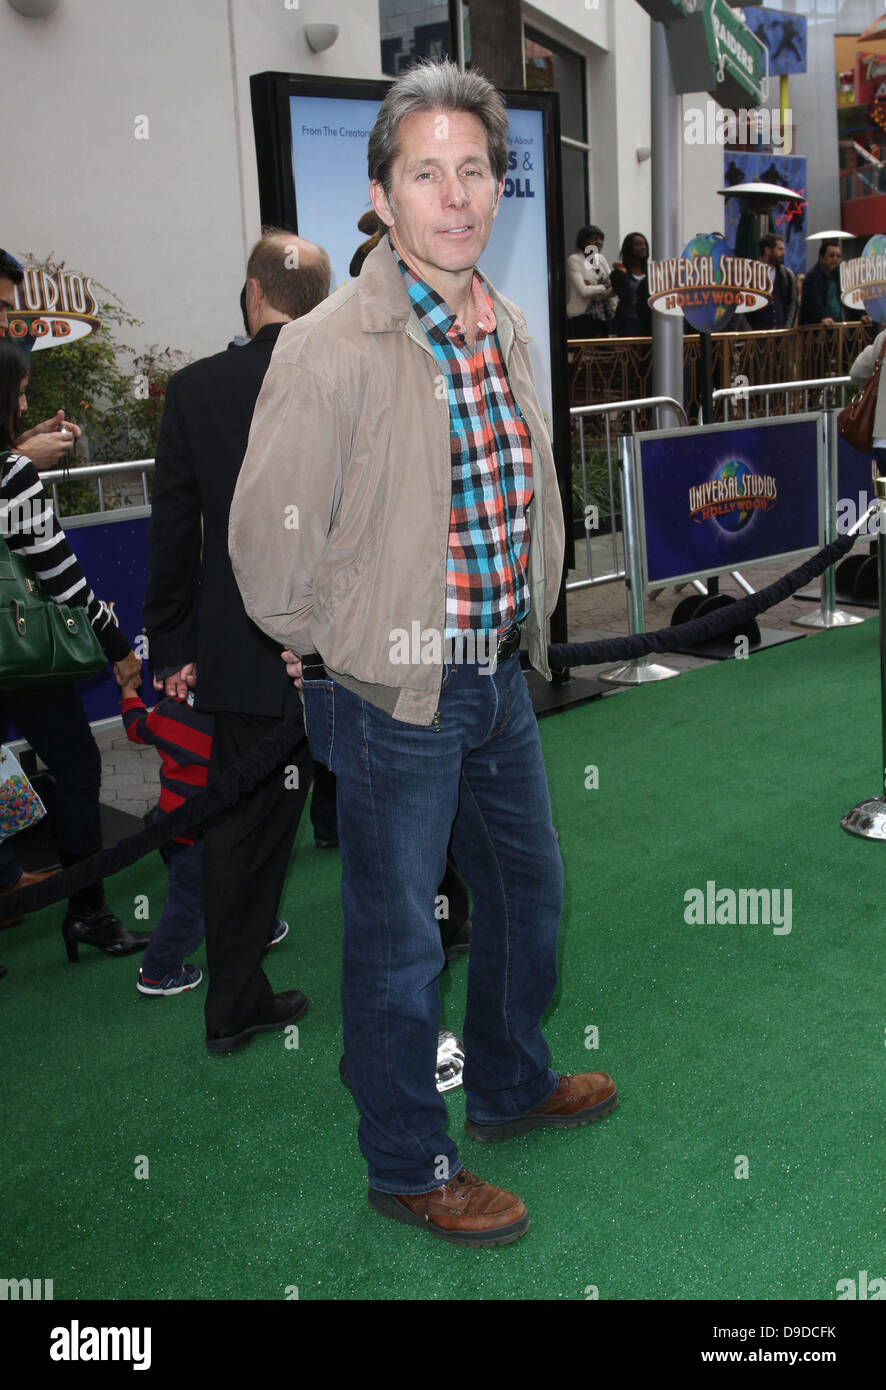 Gary Cole Los Angeles premiere of 'Hop' at Universal Studios Hollywood Universal City, California 27.03.11 Stock Photo